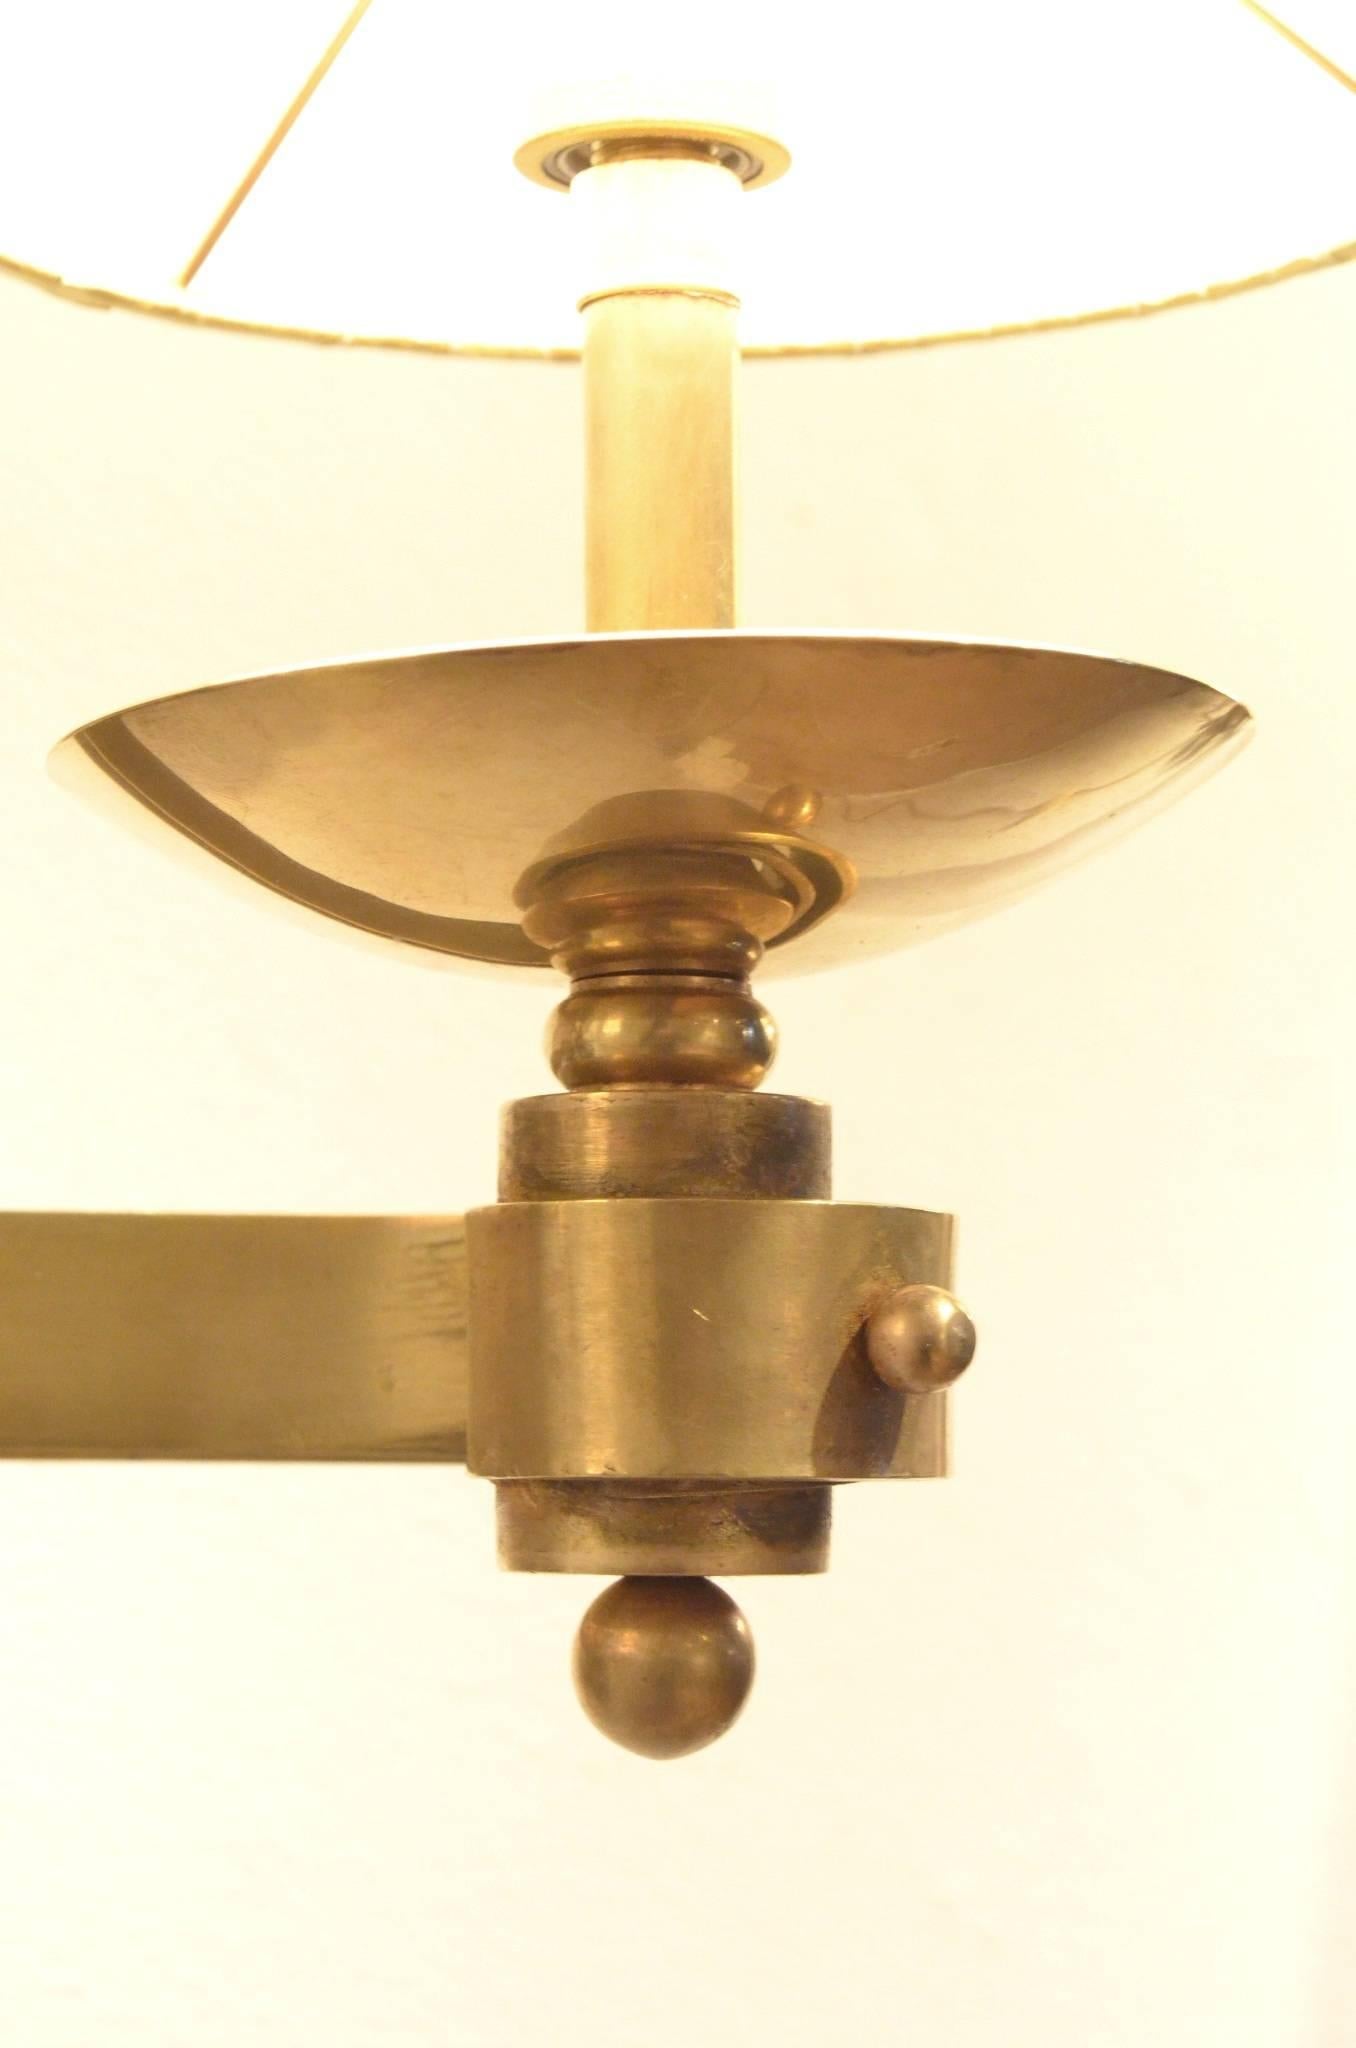 Set of three extra large sized wall sconces from the 1930s in the style of René Drouet and originating from a Hotel near Deauville, outstanding curvy brass structures matched with new textile shades.